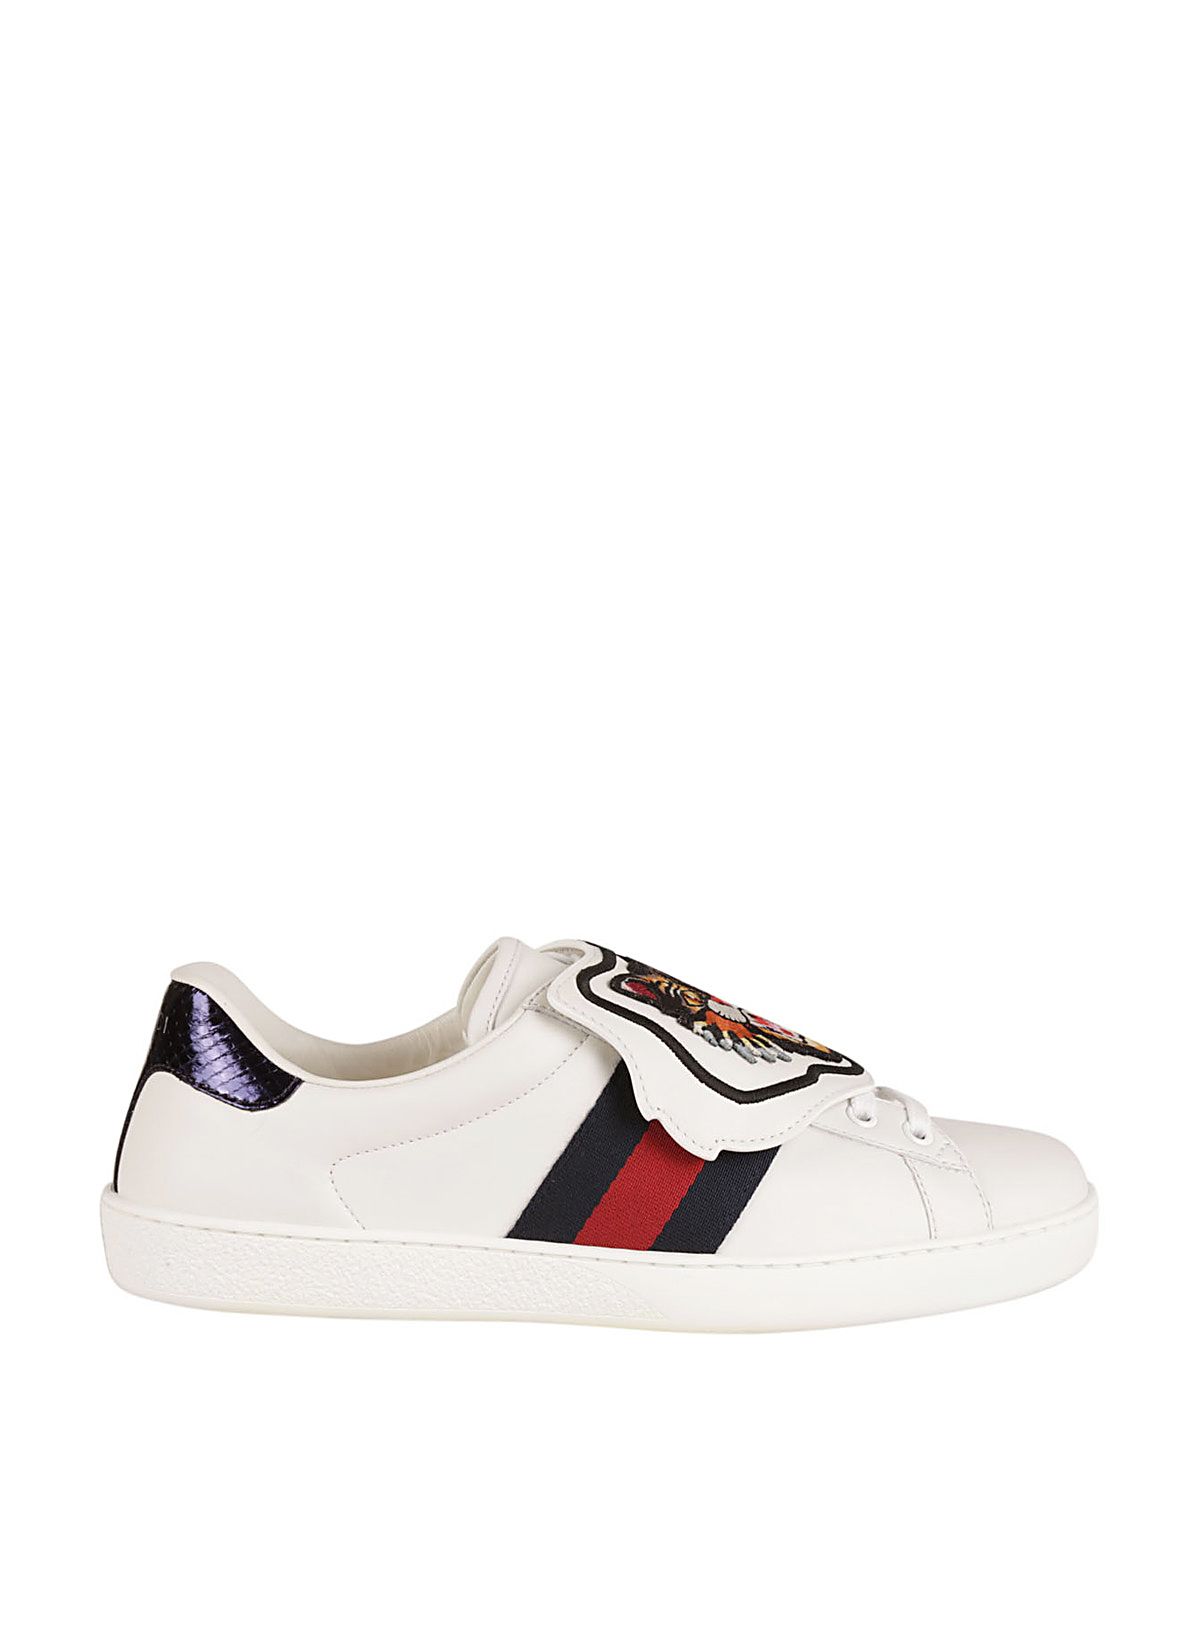 GUCCI ACE WATERSNAKE-TRIMMED EMBELLISHED LEATHER SNEAKERS, WHITE | ModeSens